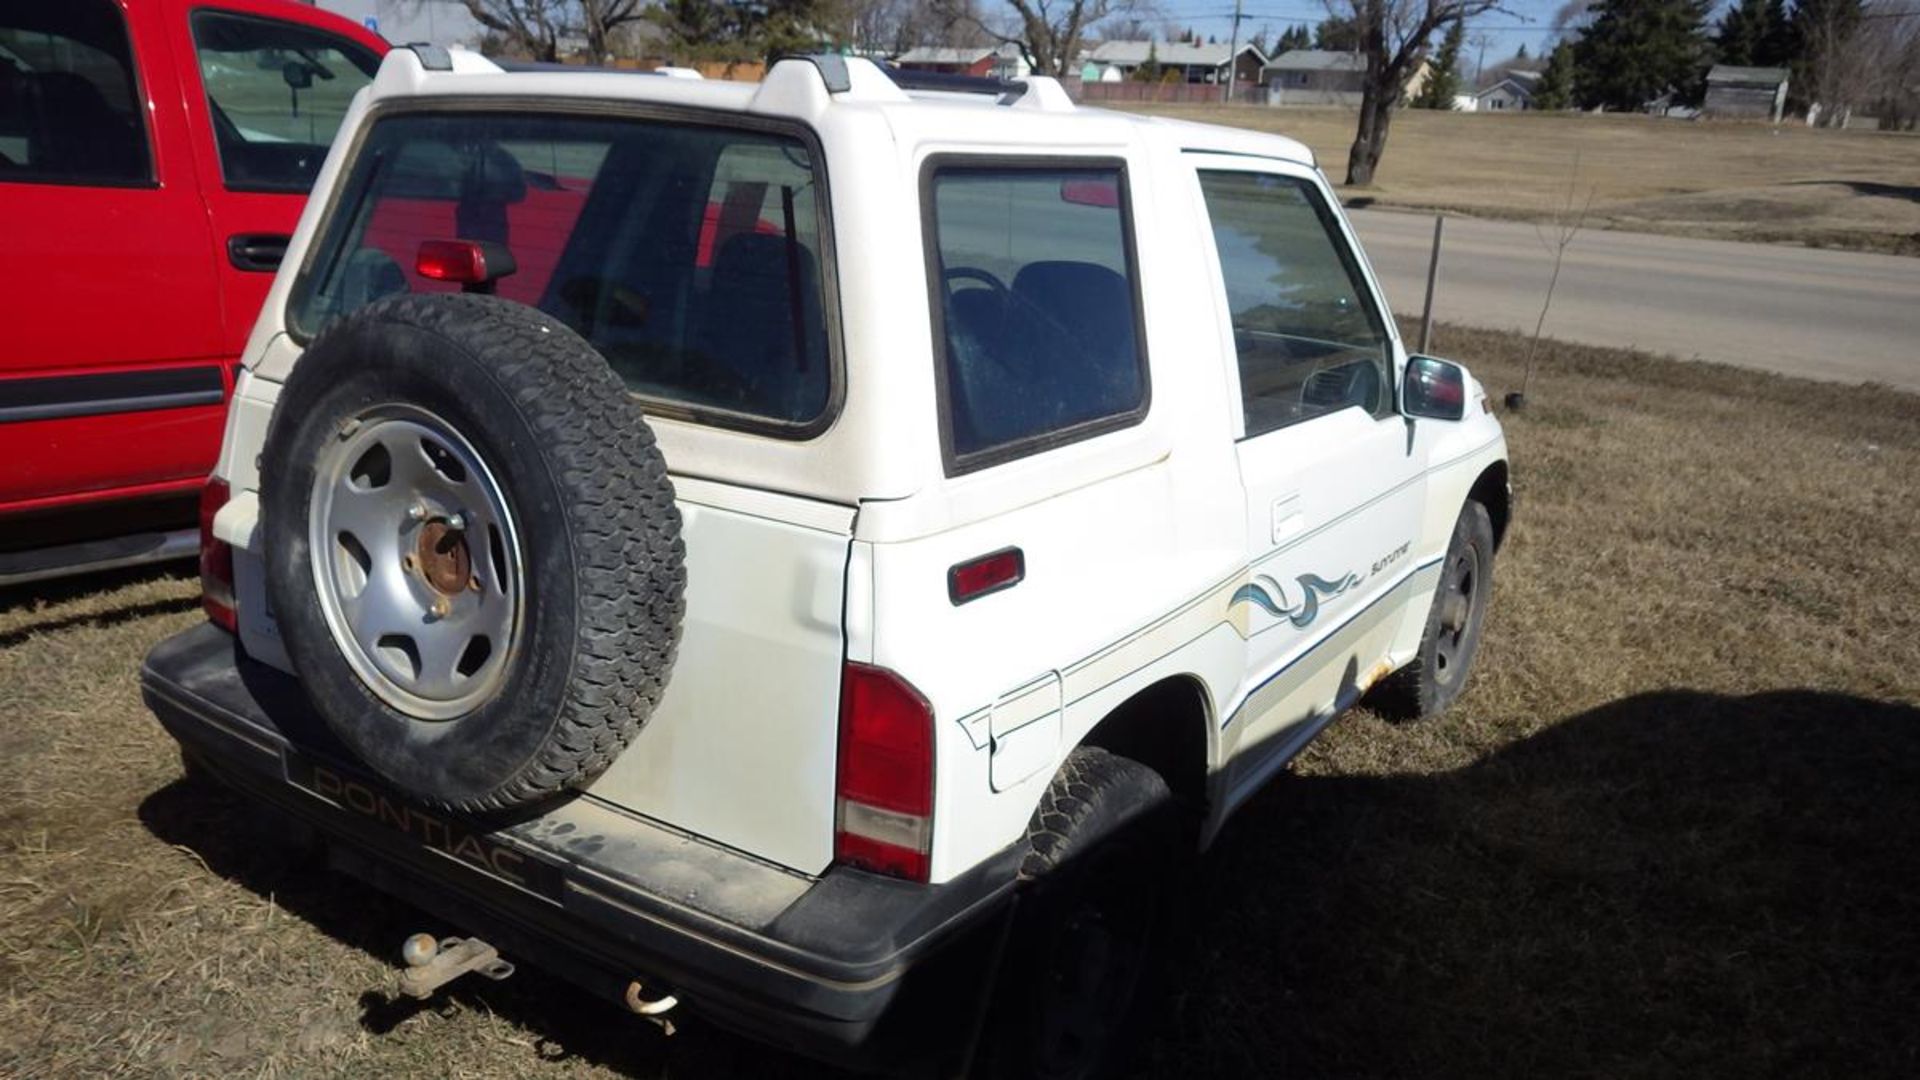 1995 Pontiac Sunrunner 4 x 4 with 4 spd manual tranny, 191,465 KMS, Vin# 2CGBJ1868S6929399 removable - Image 4 of 16